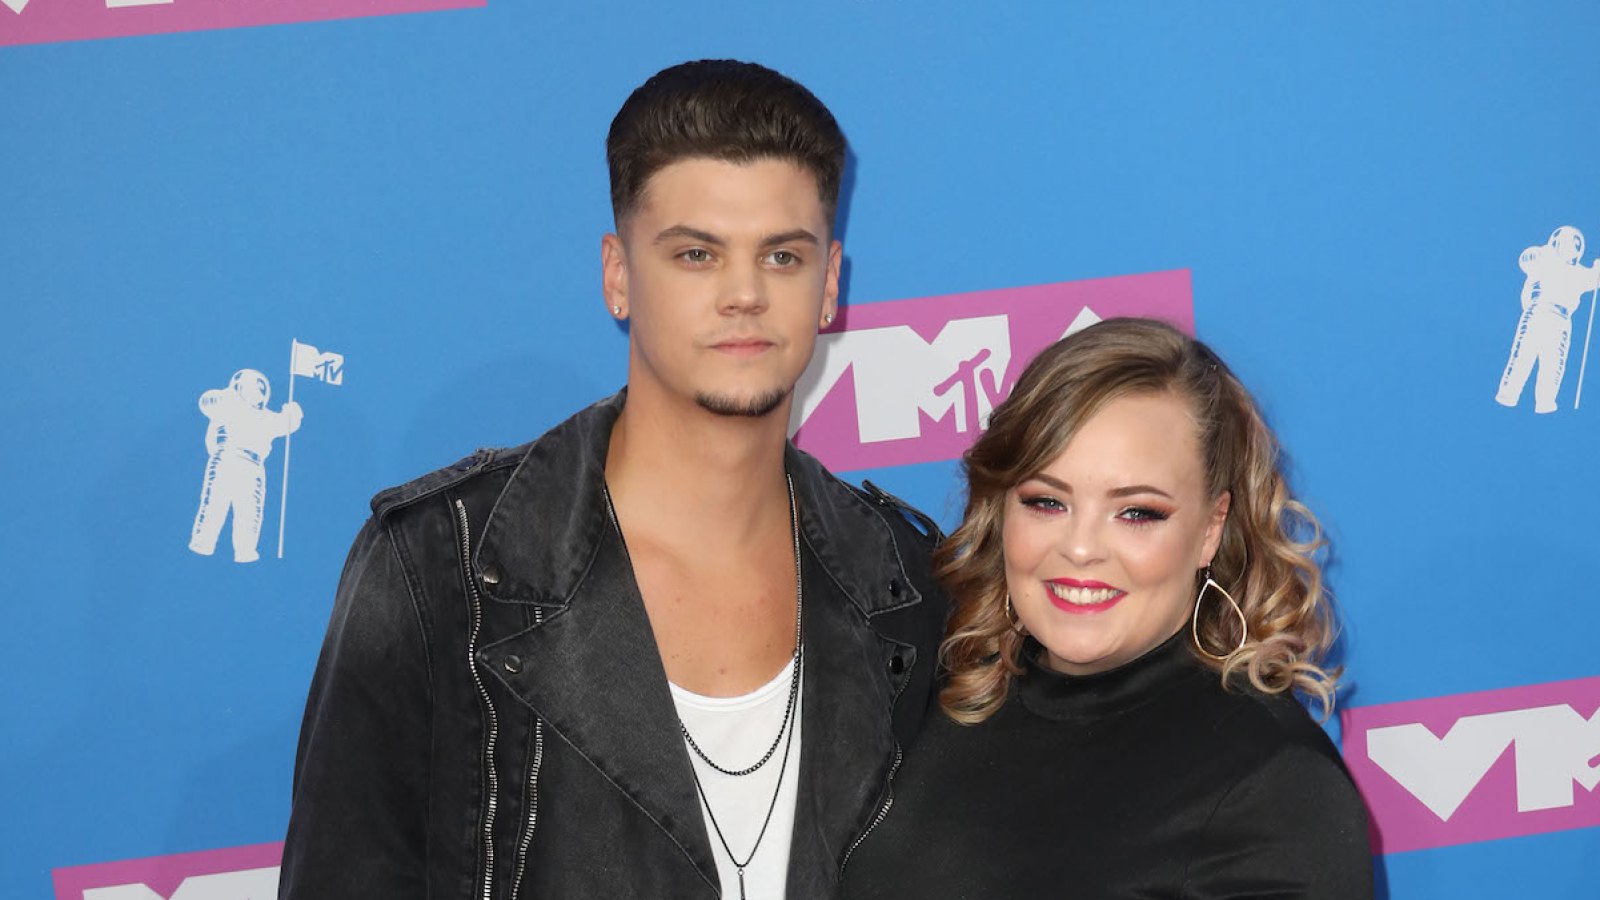 Catelynn Lowell and Tyler Baltierra Reunite With Daughter Carly